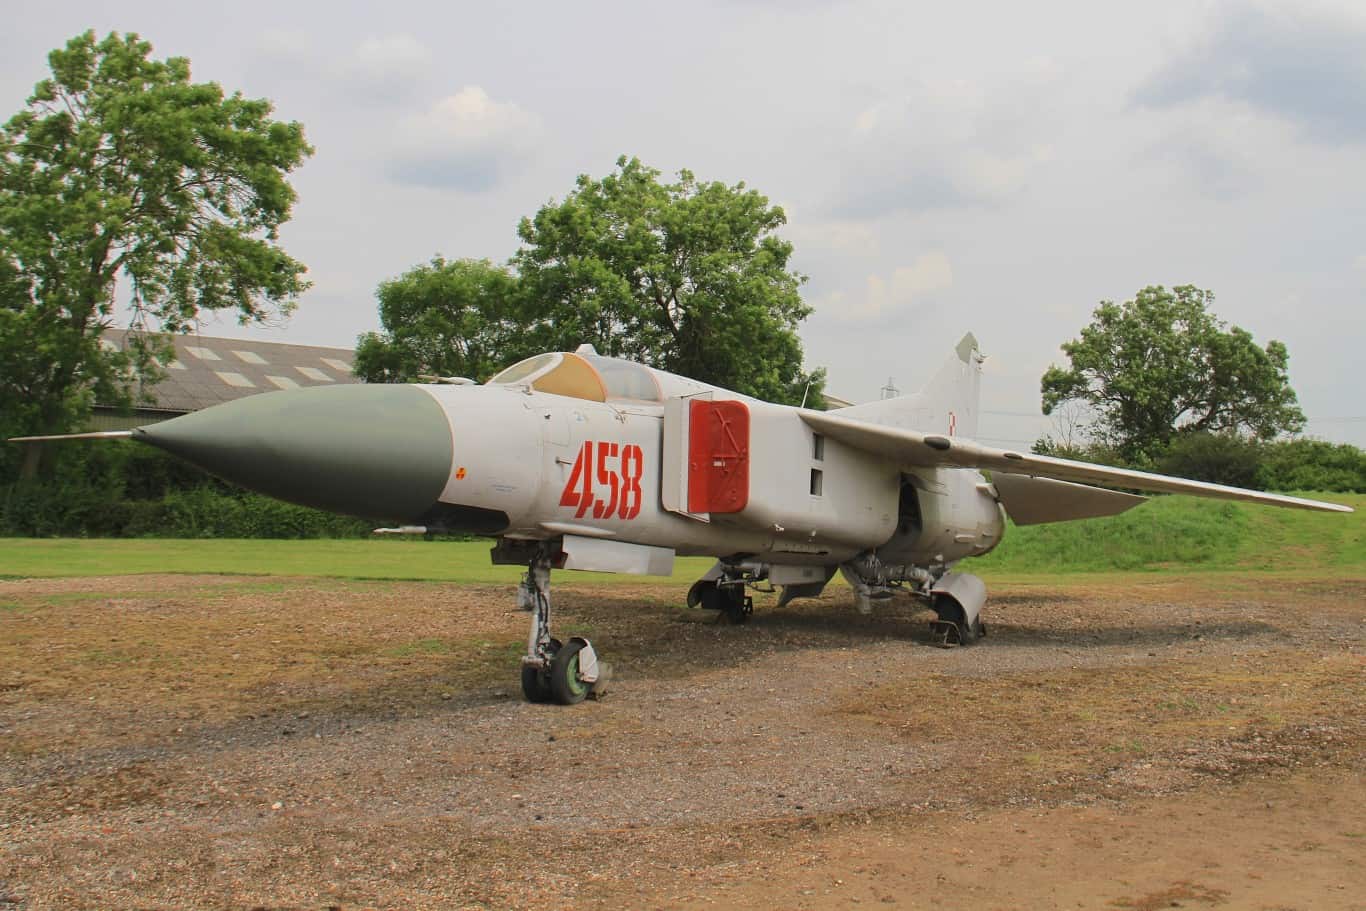 MIG-23 Flogger by Ronnie Macdonald